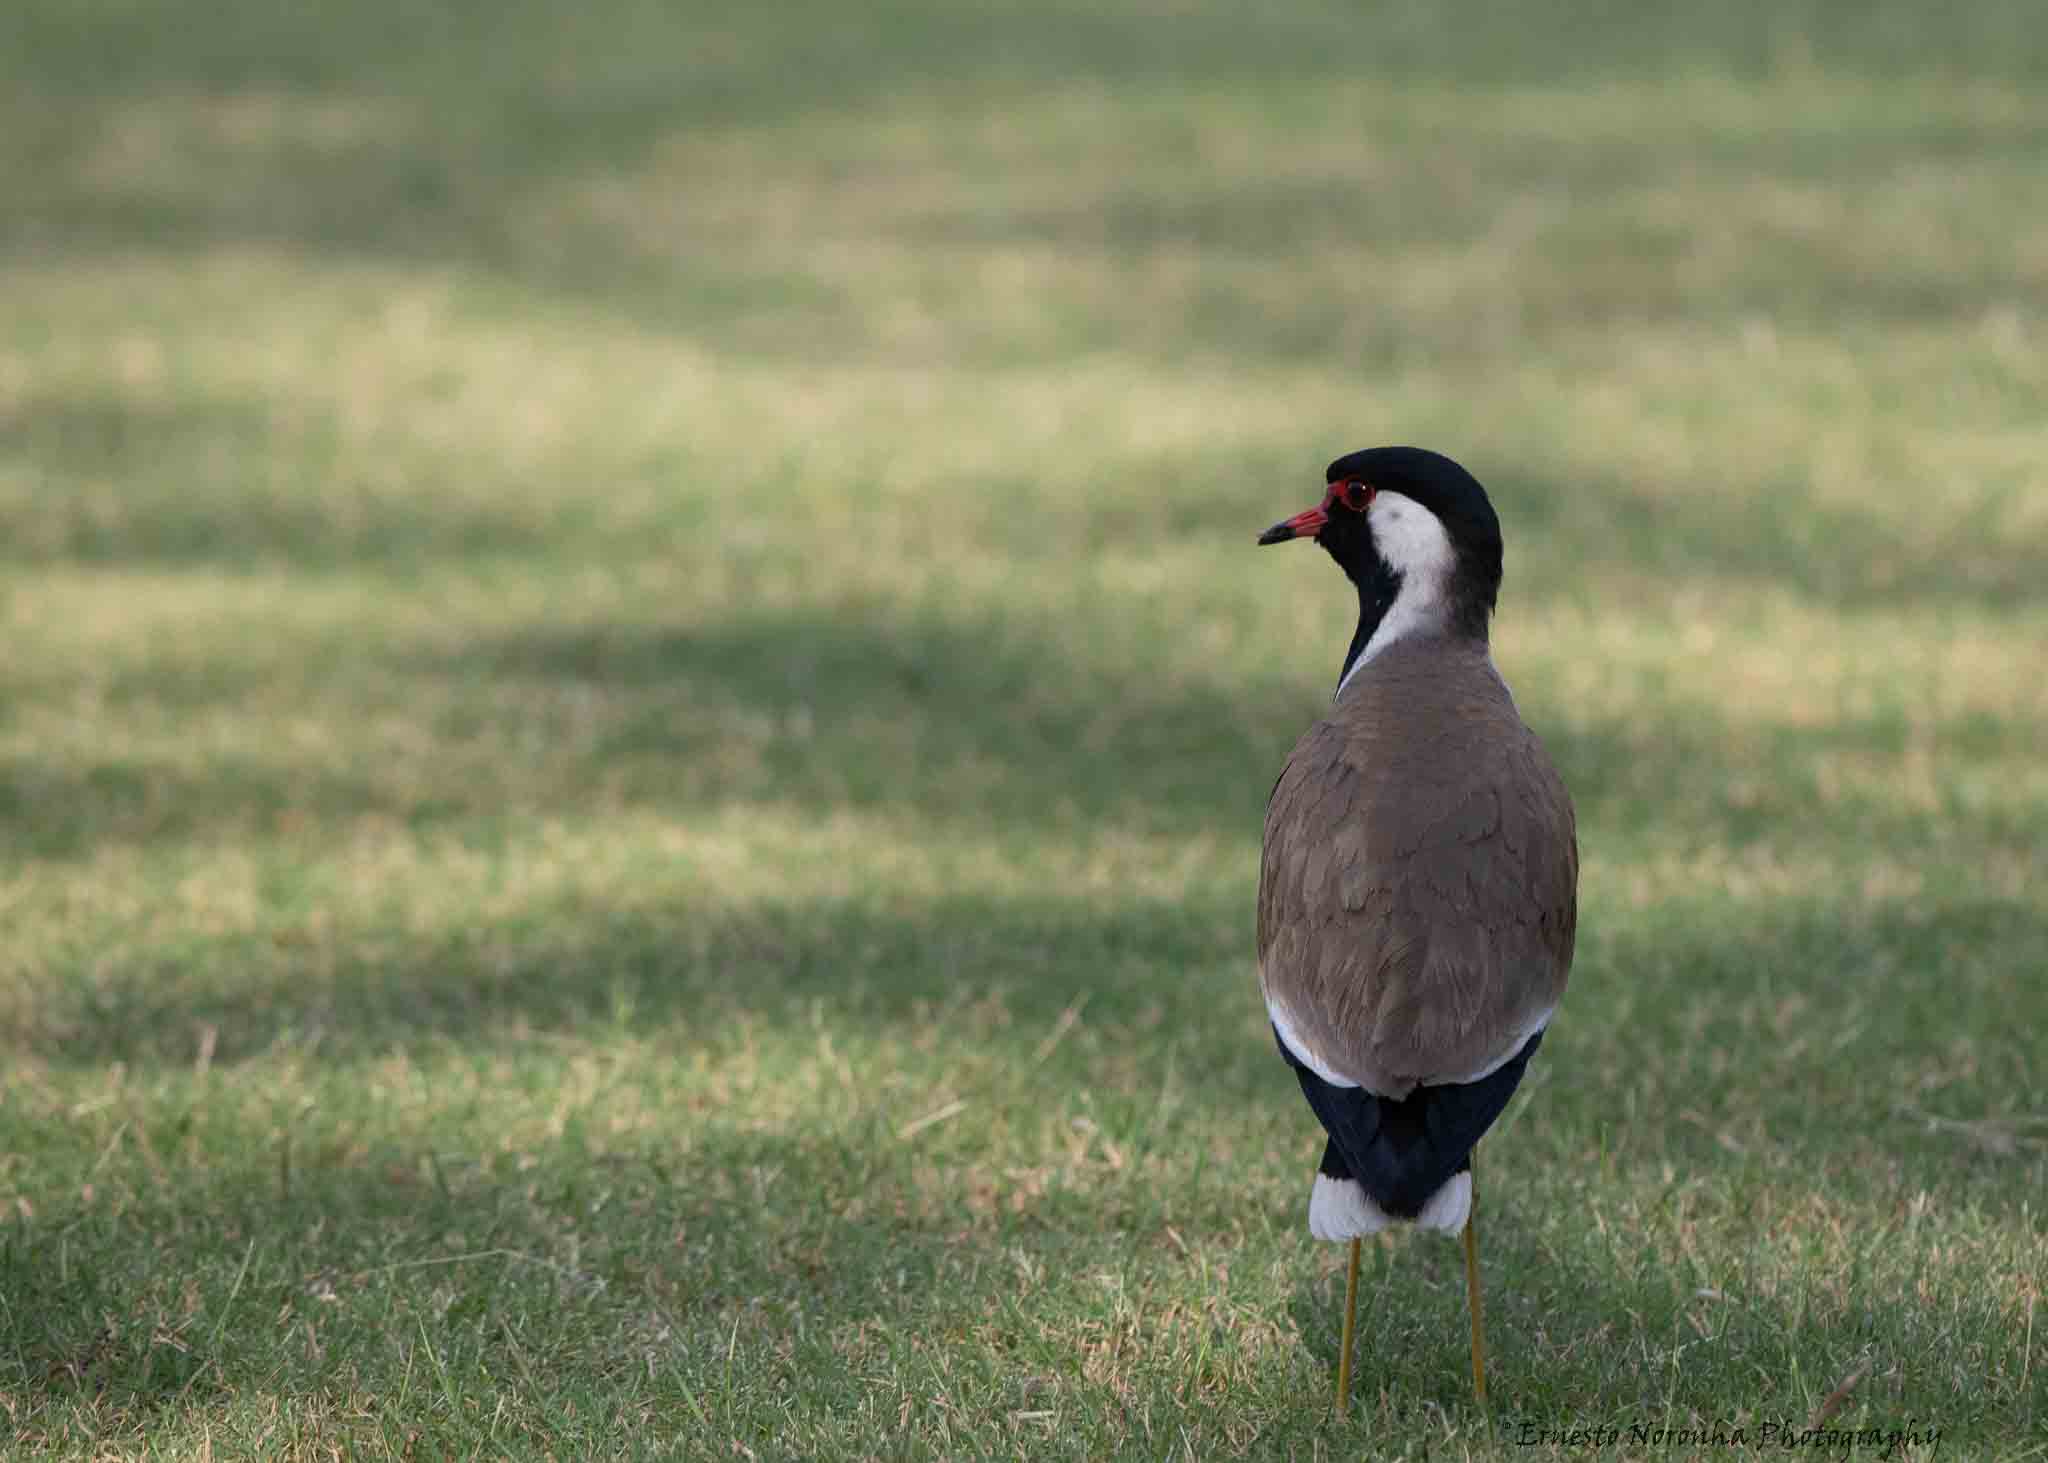 RED-WATTLED LAPWING